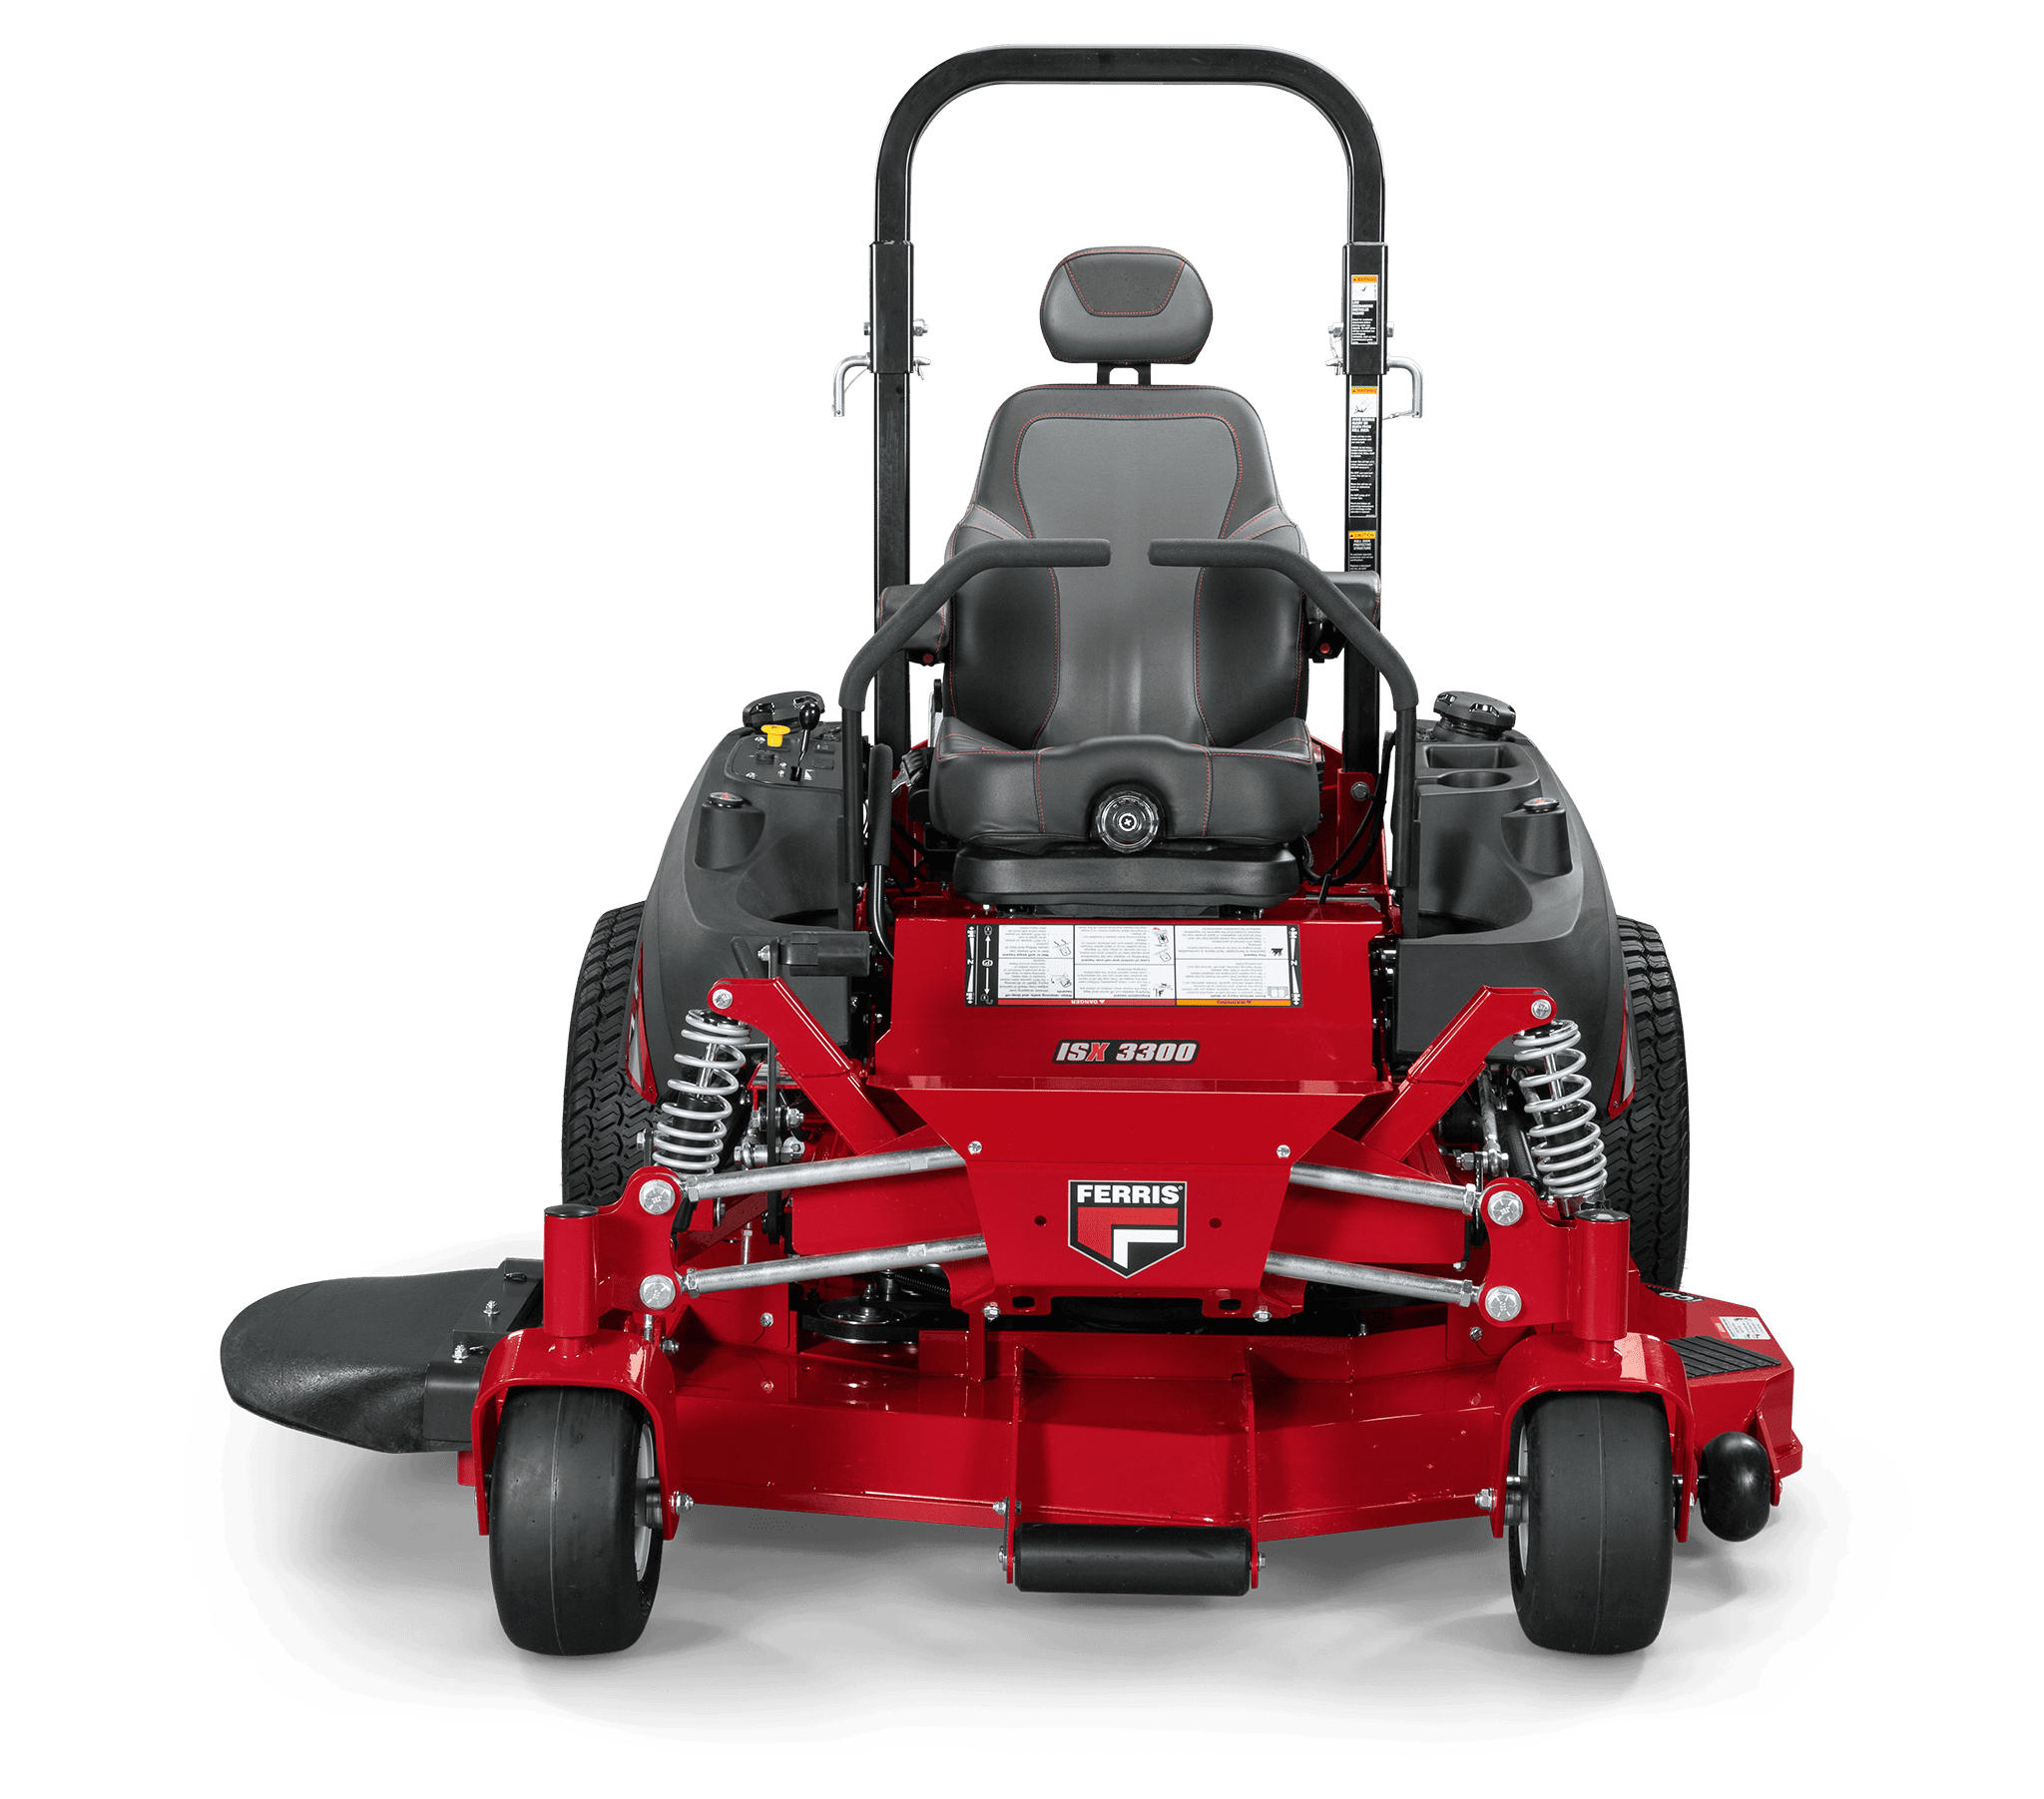 Ferris Isx™ 3300 Zero Turn Mower Snappy S Outdoor Equipment Sales And Service